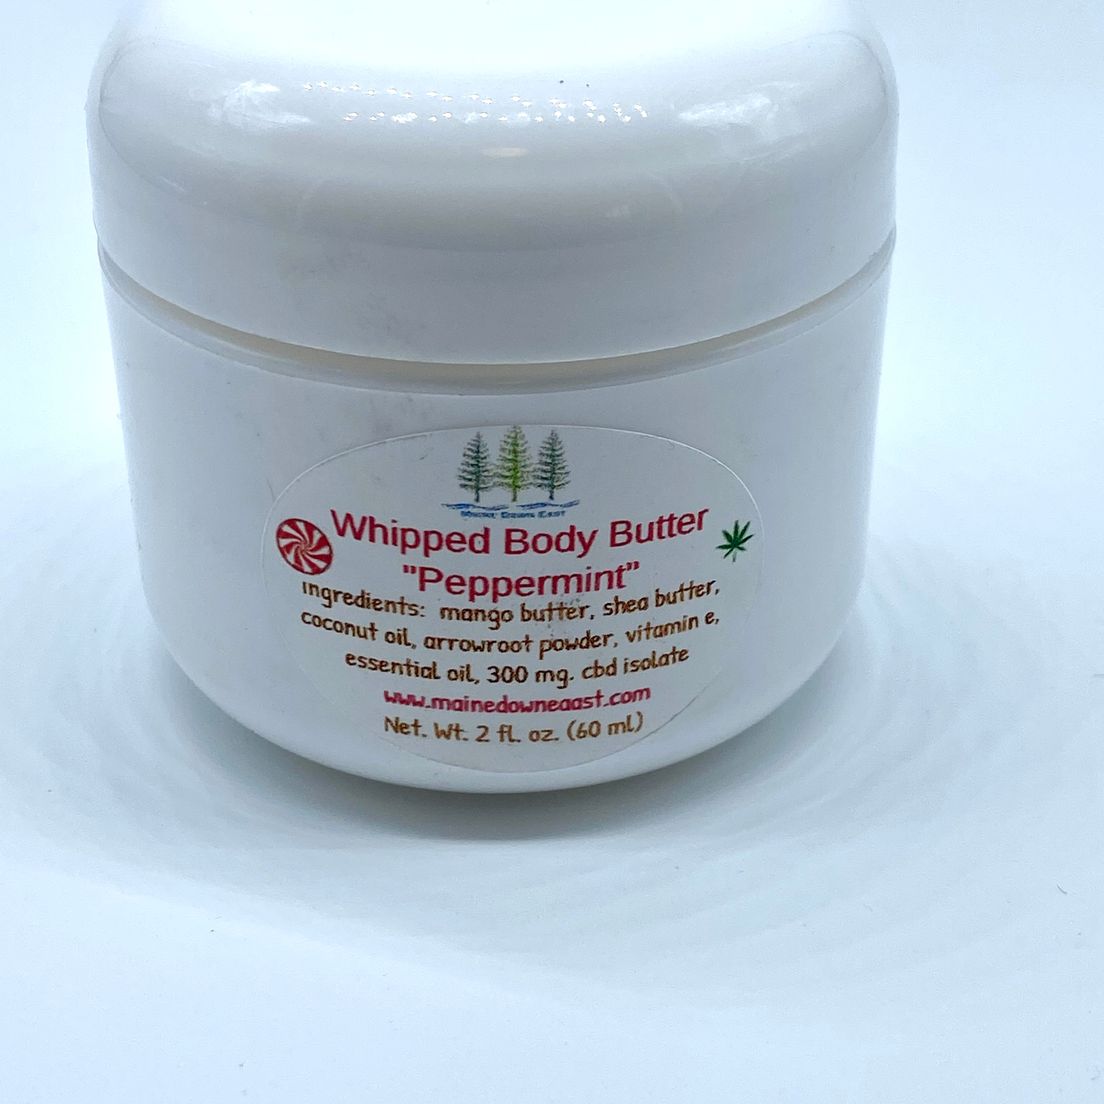 300mg Whipped Body Butter (Peppermint)